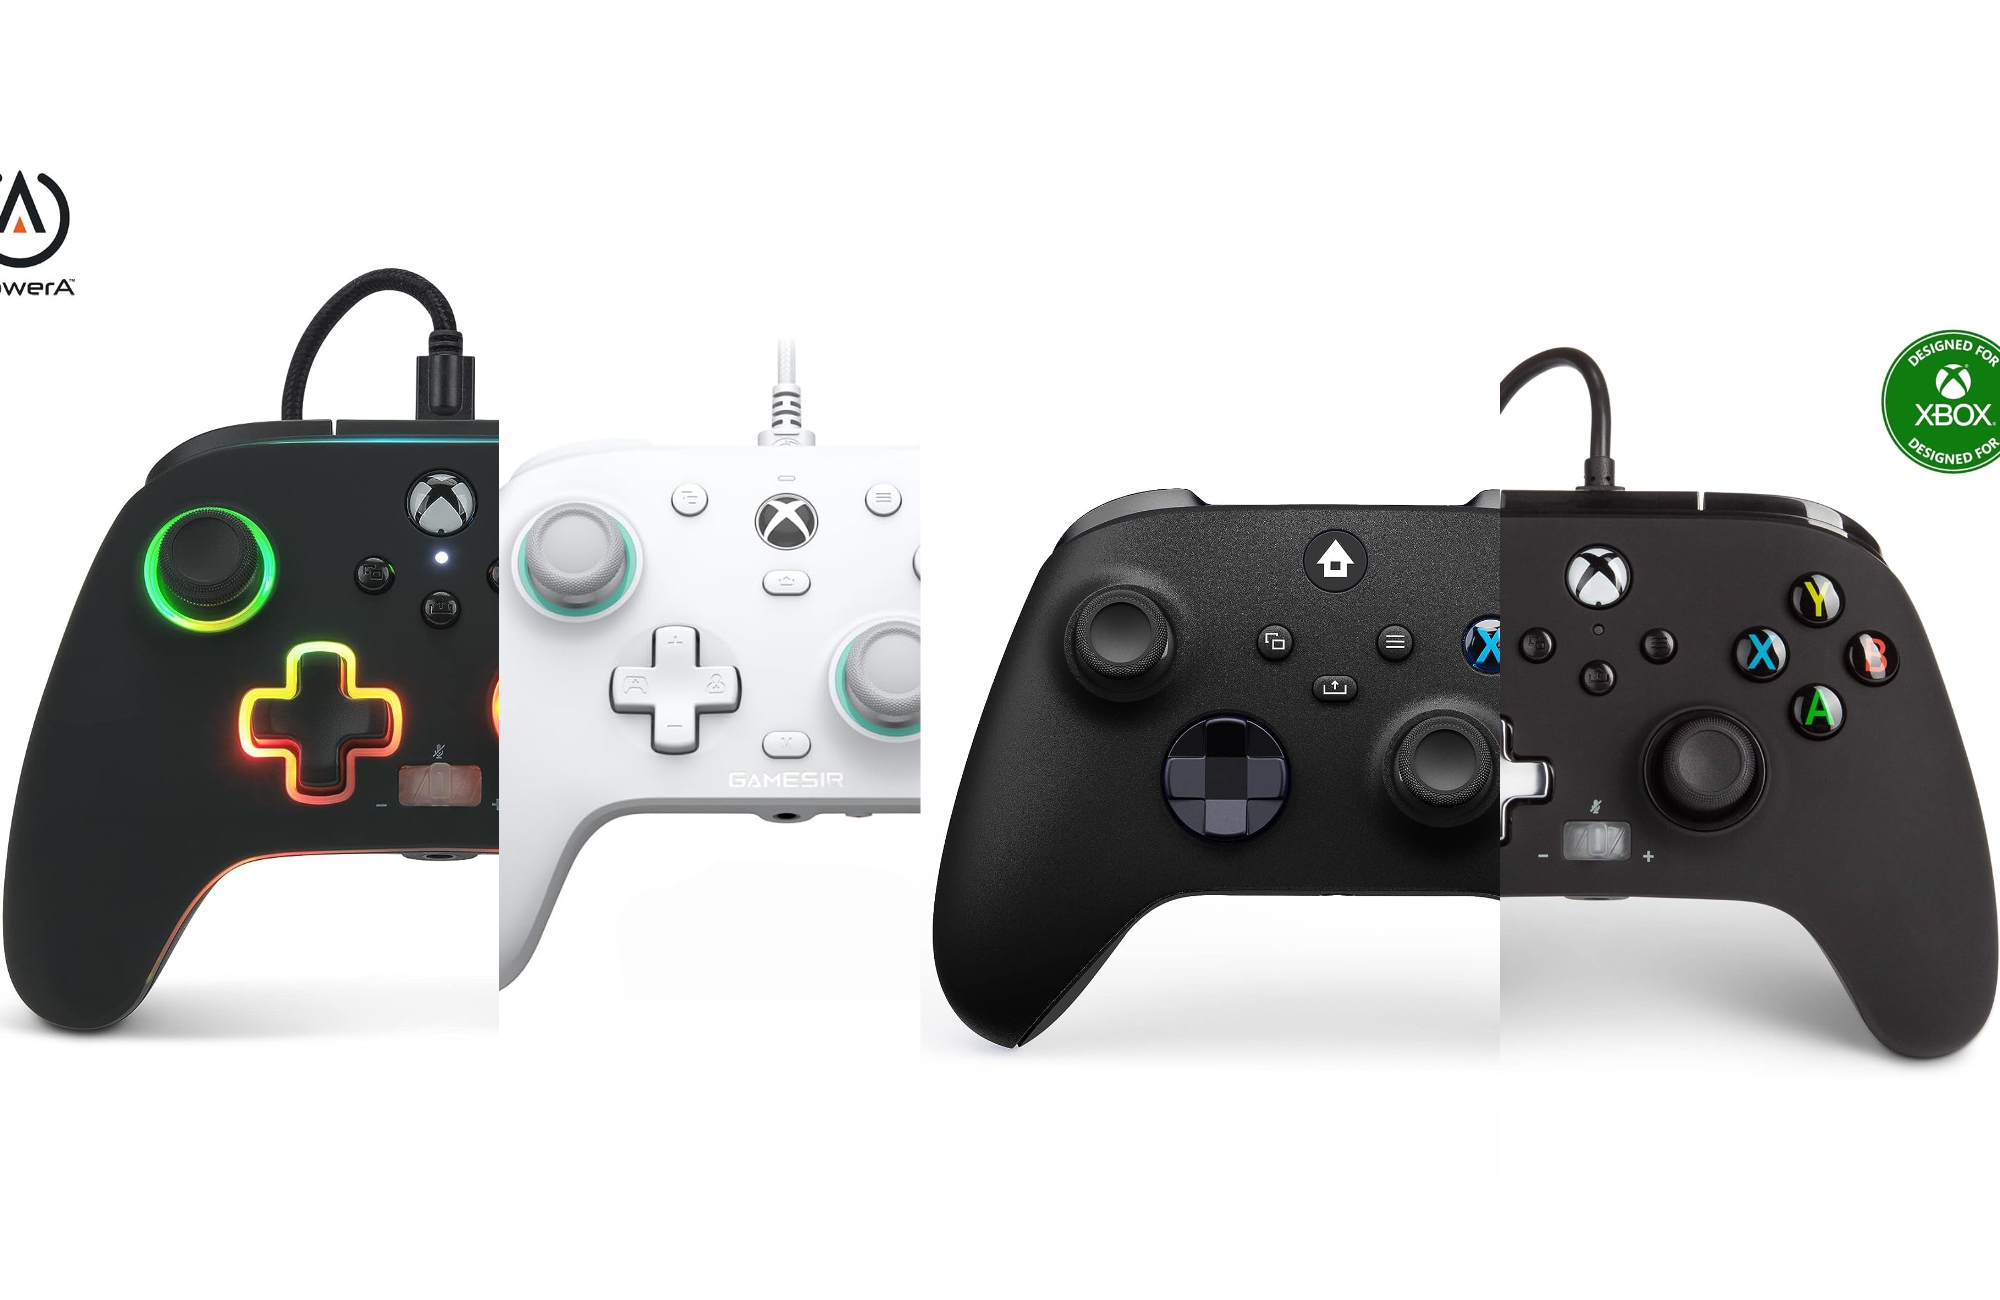 GameSir G7 Wired Customisable Controller for Xbox & PC - Blog of Dad